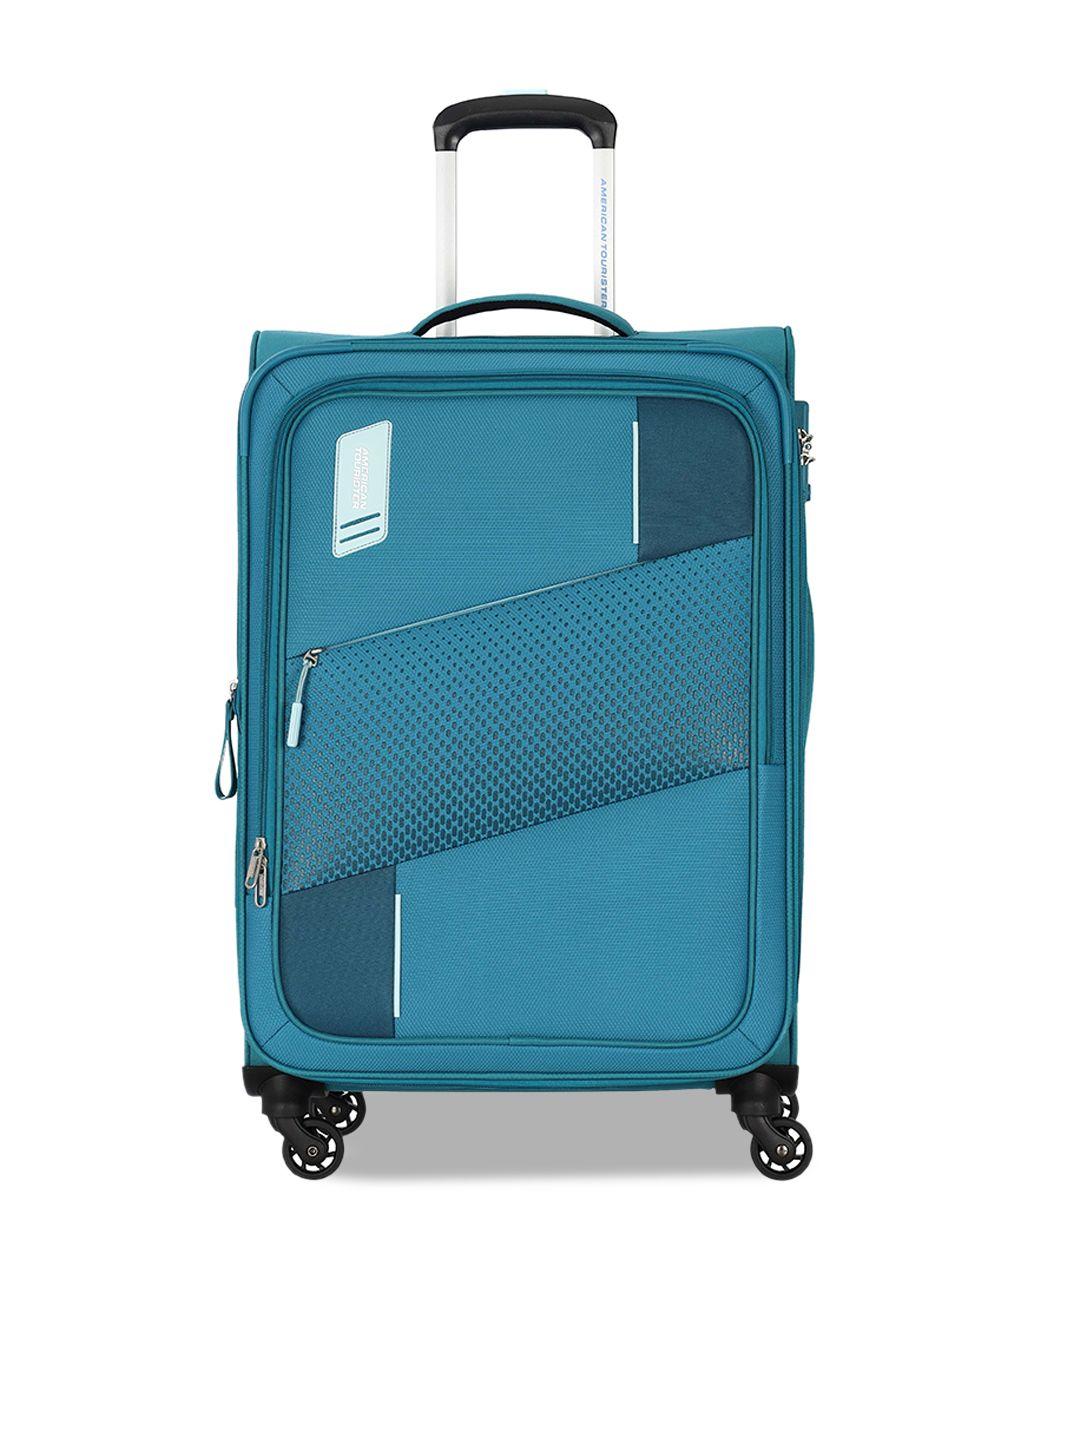 american tourister textured water resistant soft-sided medium trolley suitcase